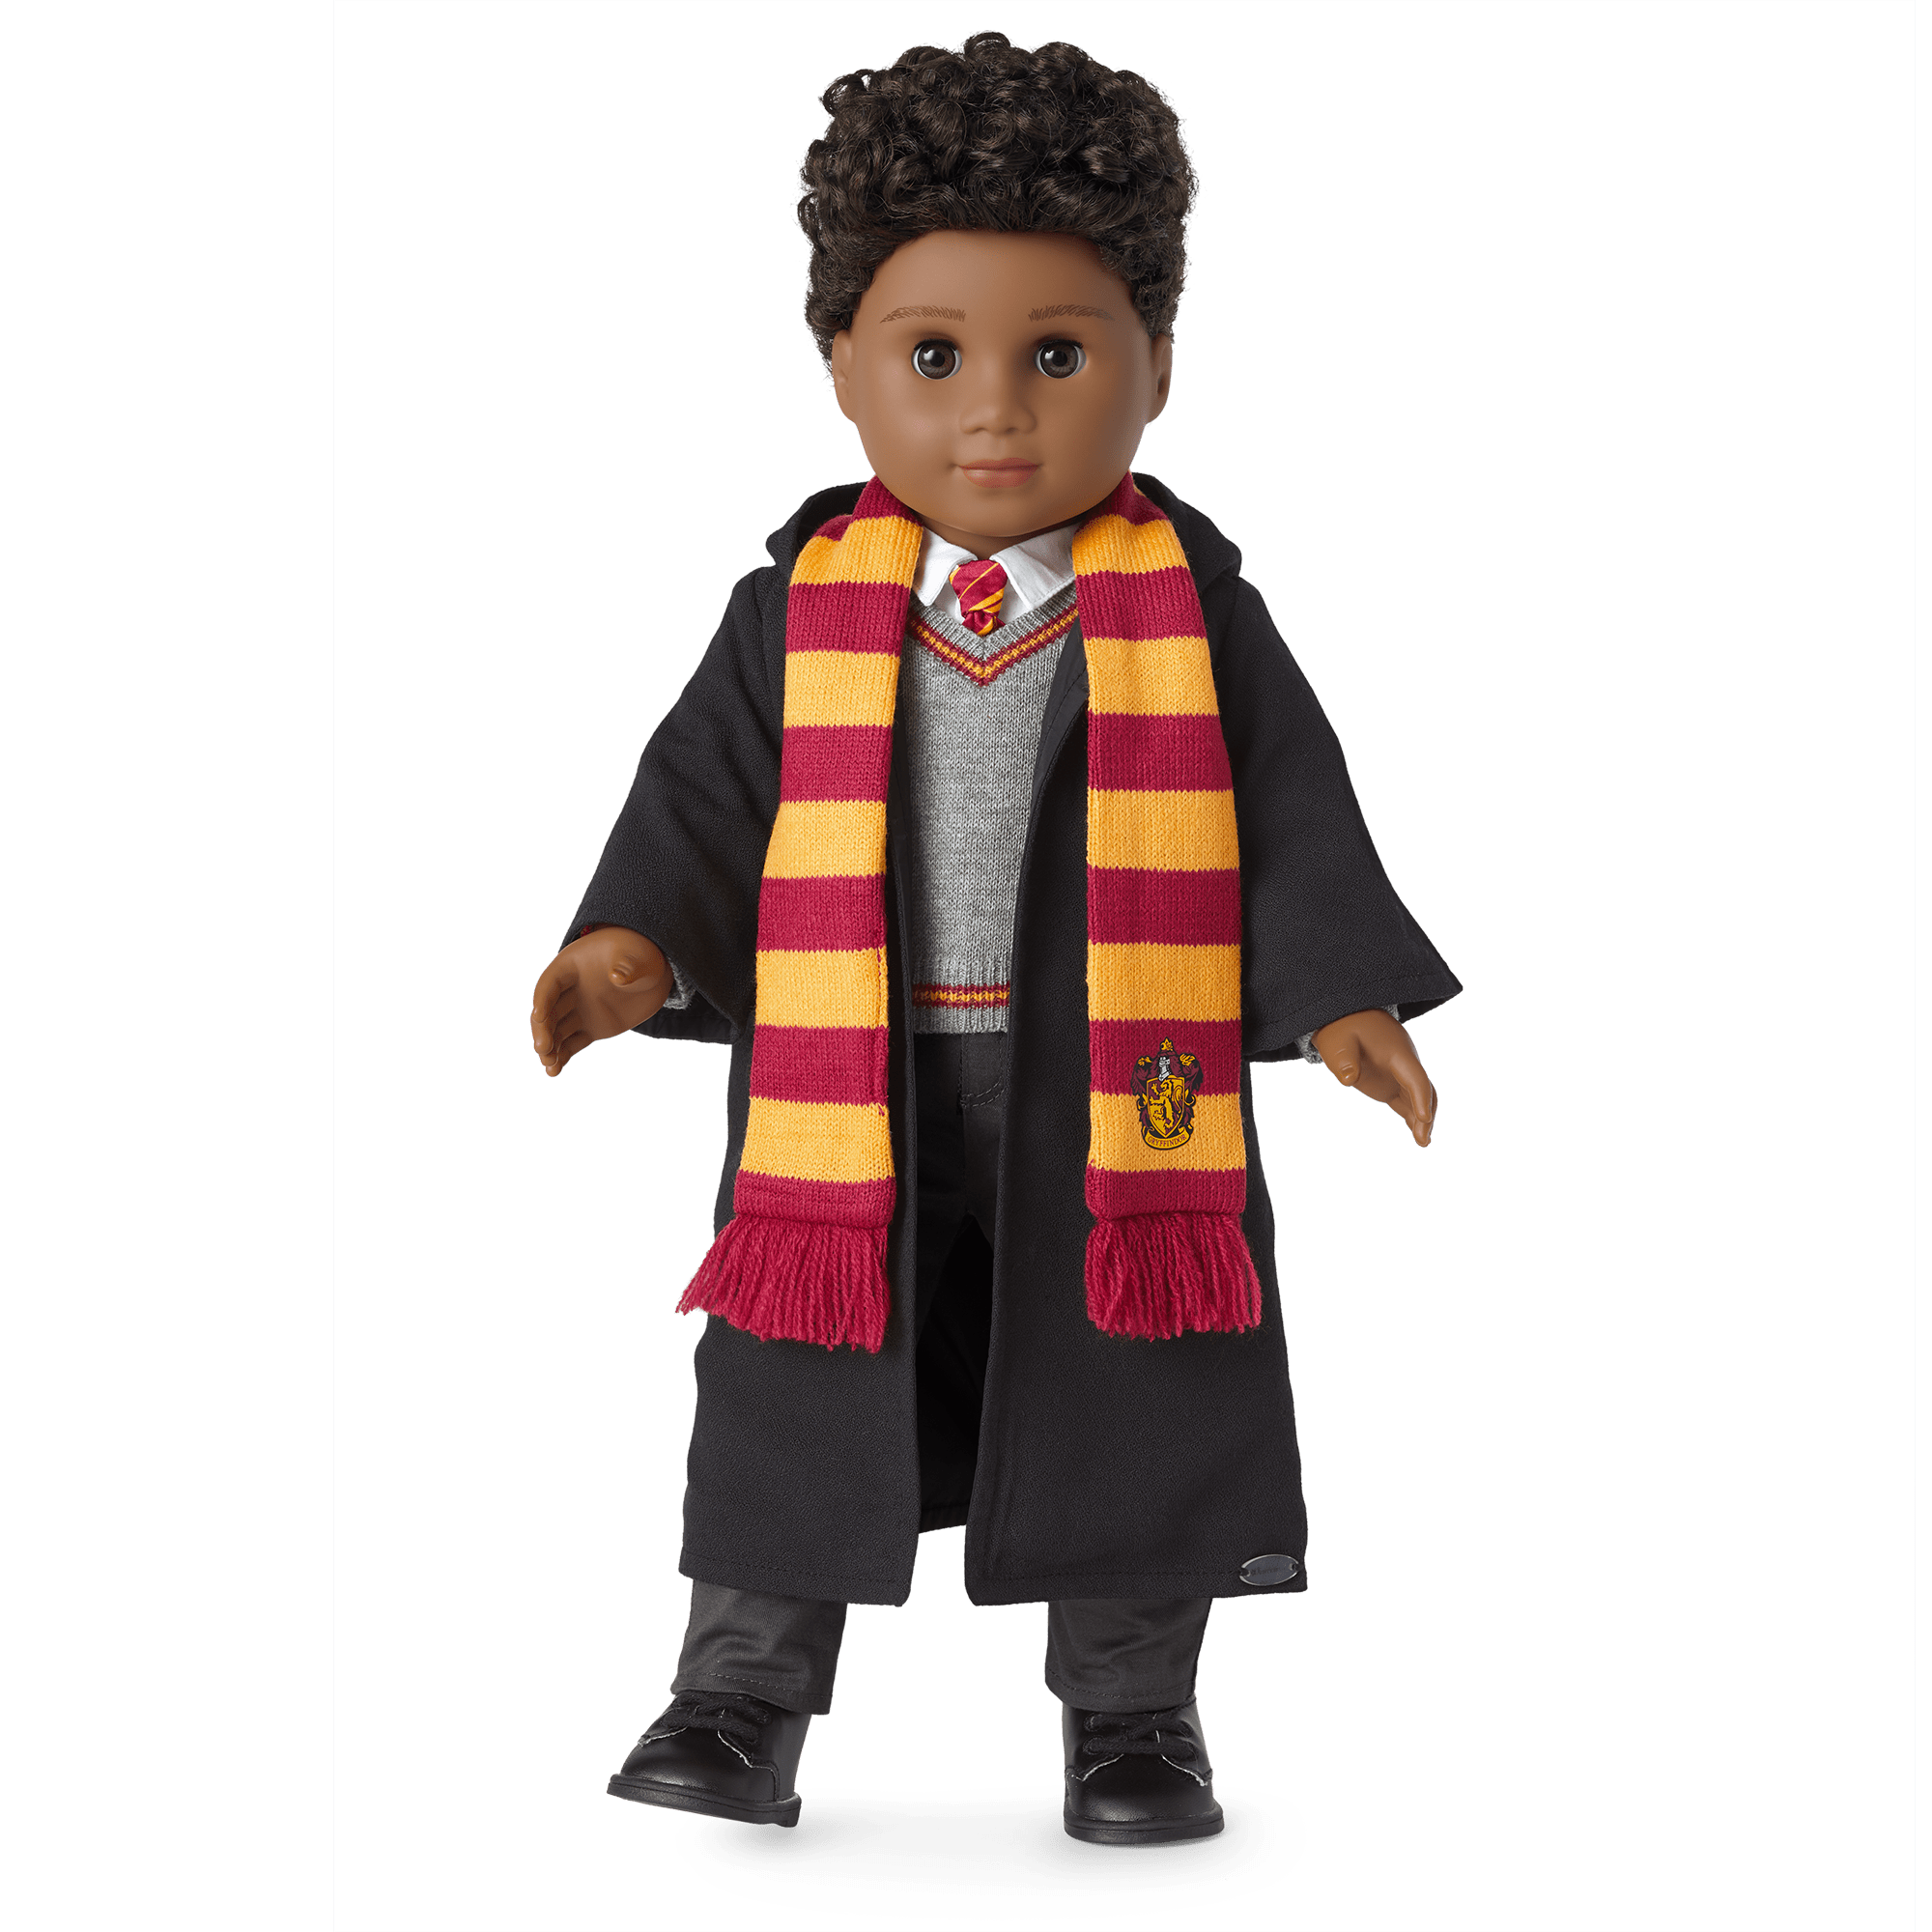 Hogwarts™ Uniform with Pants for 18-inch Dolls